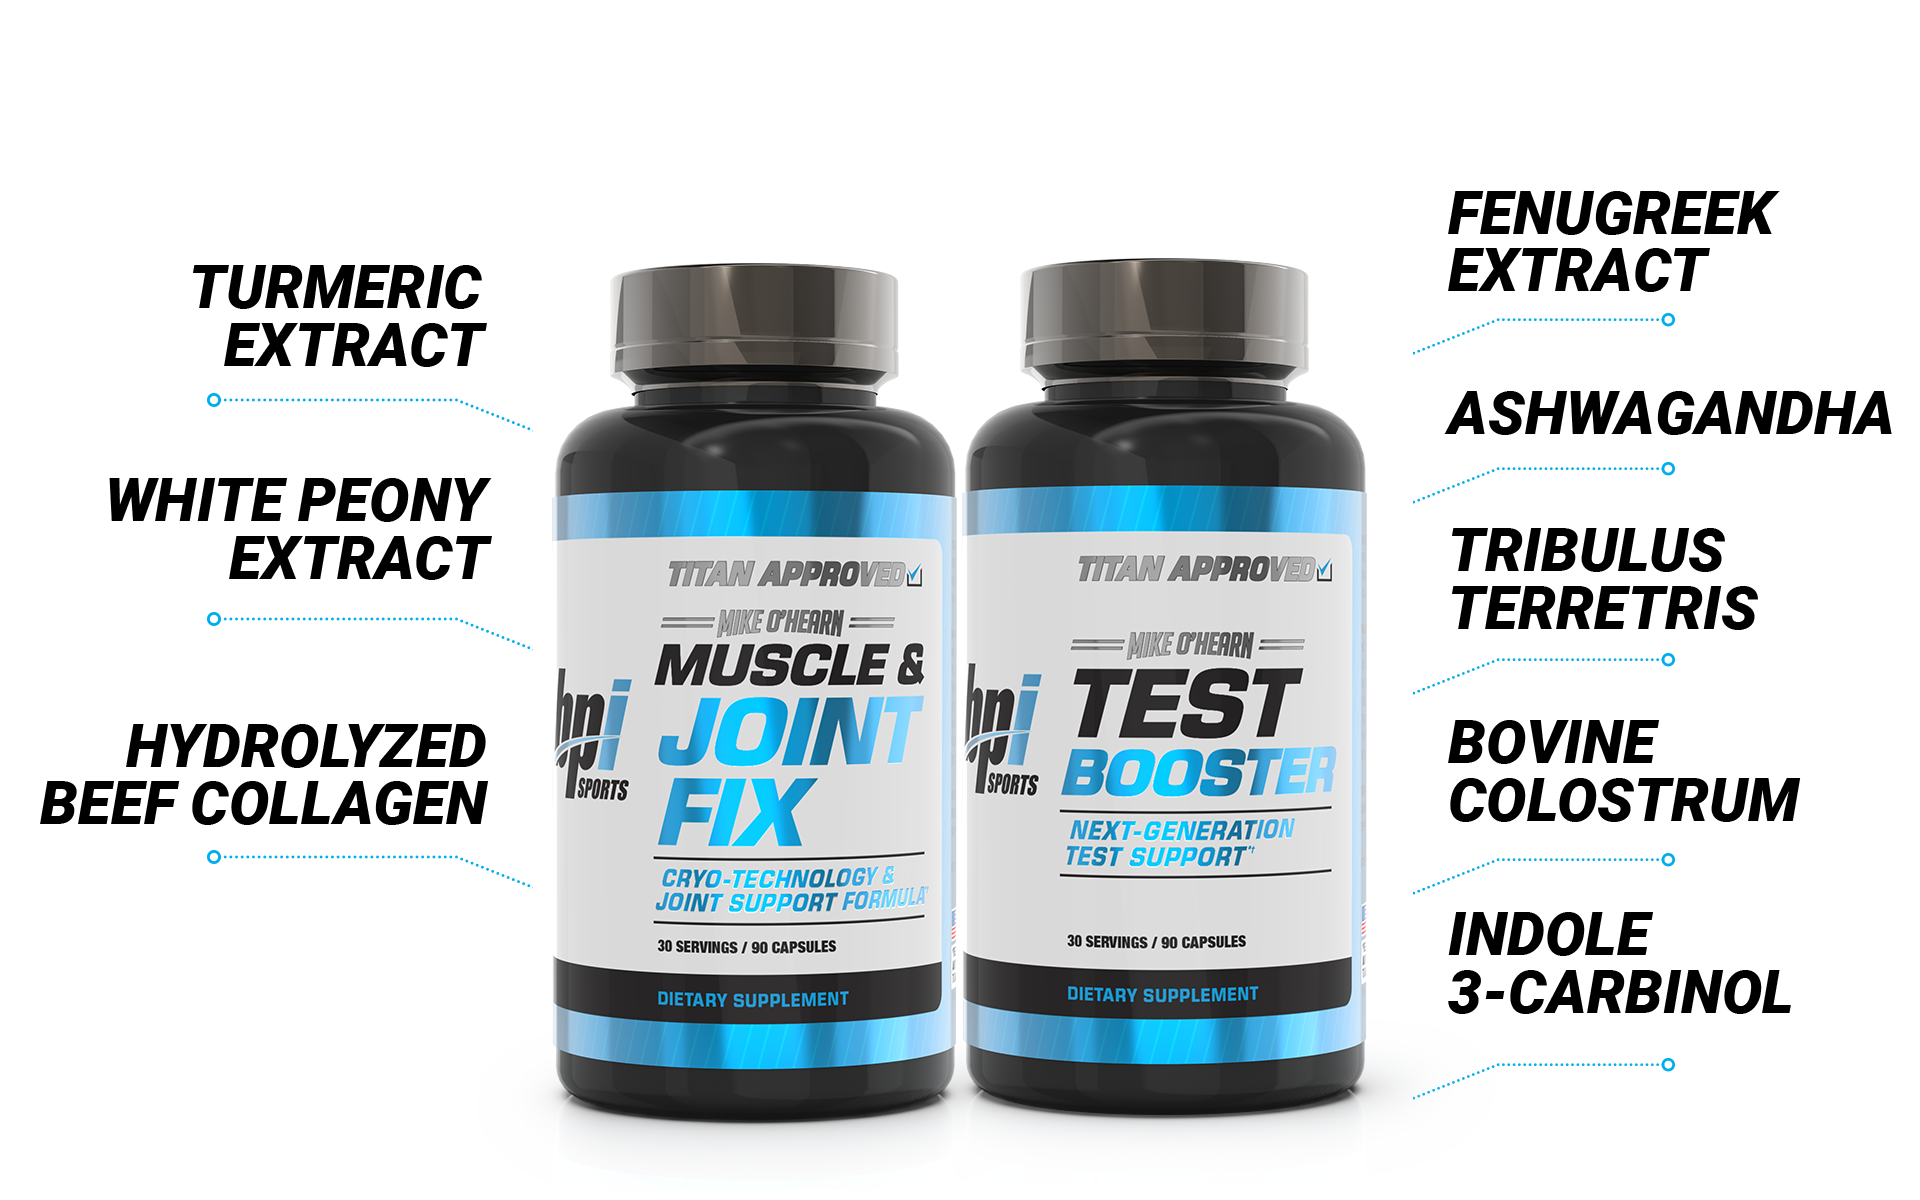 2 capsule bottles of Muscle & Joint fix and Test booster with benefits